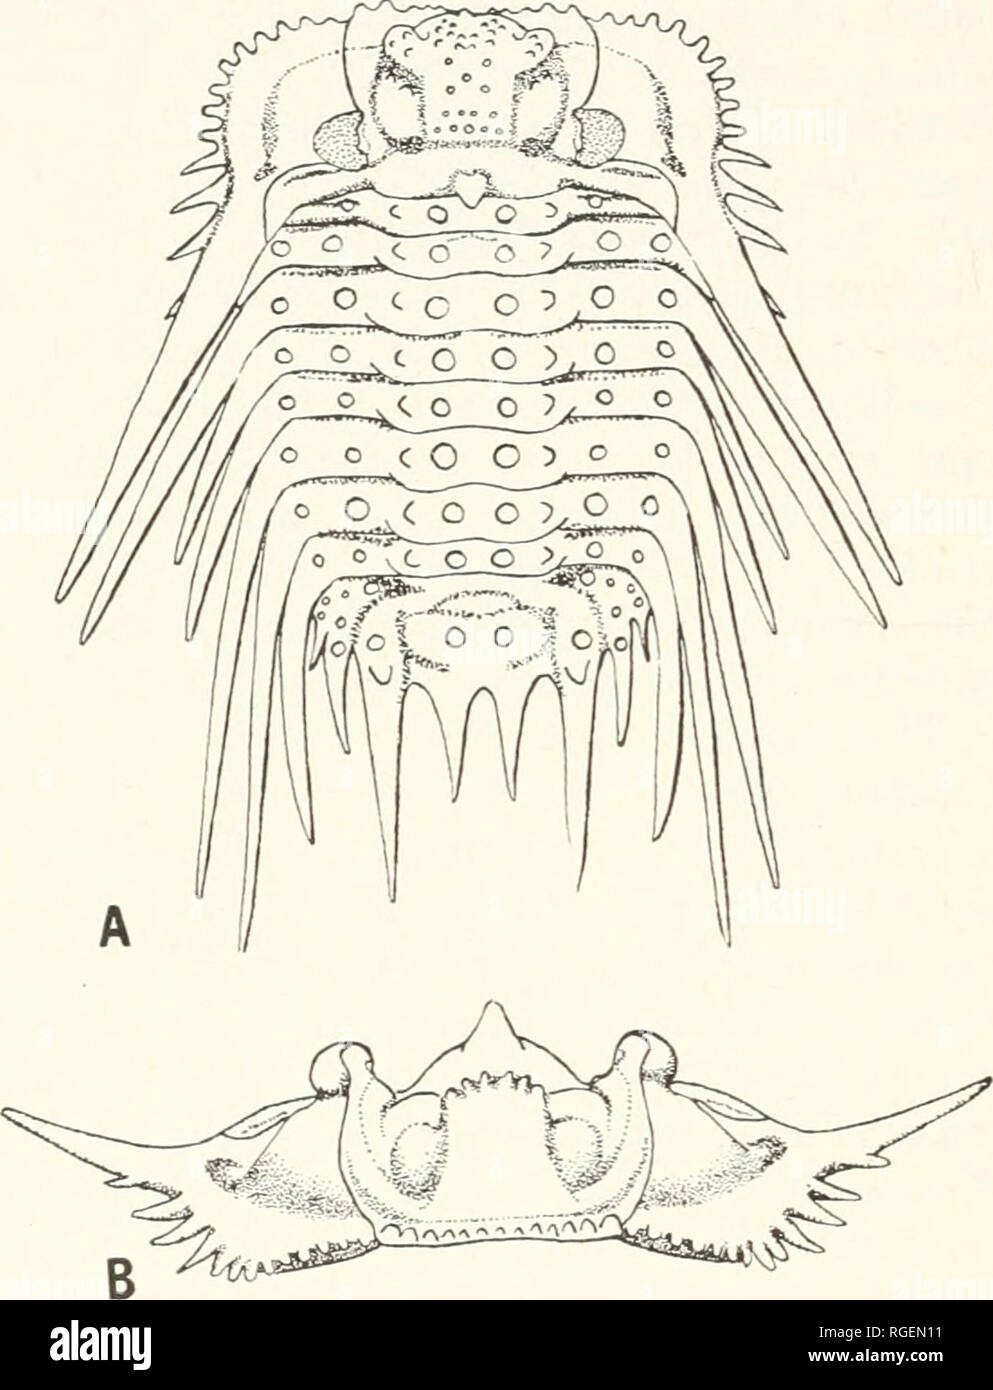 . Bulletin of the Museum of Comparative Zoology at Harvard College. Zoology. 206 BULLETIN : MUSEUM OF COMPARATIVE ZOOLOGY Tj'pe Species: Odontopleiiraleonhardil^arvande, 1846. Diagnosis: Glabella as AAide across large basal glabellar lobes as across occipital ring, two pairs glabellar lobes, the anterior. Figure 7. Leonaspis new species, Lower Devonian, Haragan shale, Arbuckle Mta., Oklahoma. A, complete exoskeleton, dorsal view. B, eephalon, anterior view. C, hypostome, exterior view. X 2. Drawn from originals of Whittington 1956b, Plate 57, figures 10-16.. Please note that these images are e Stock Photo